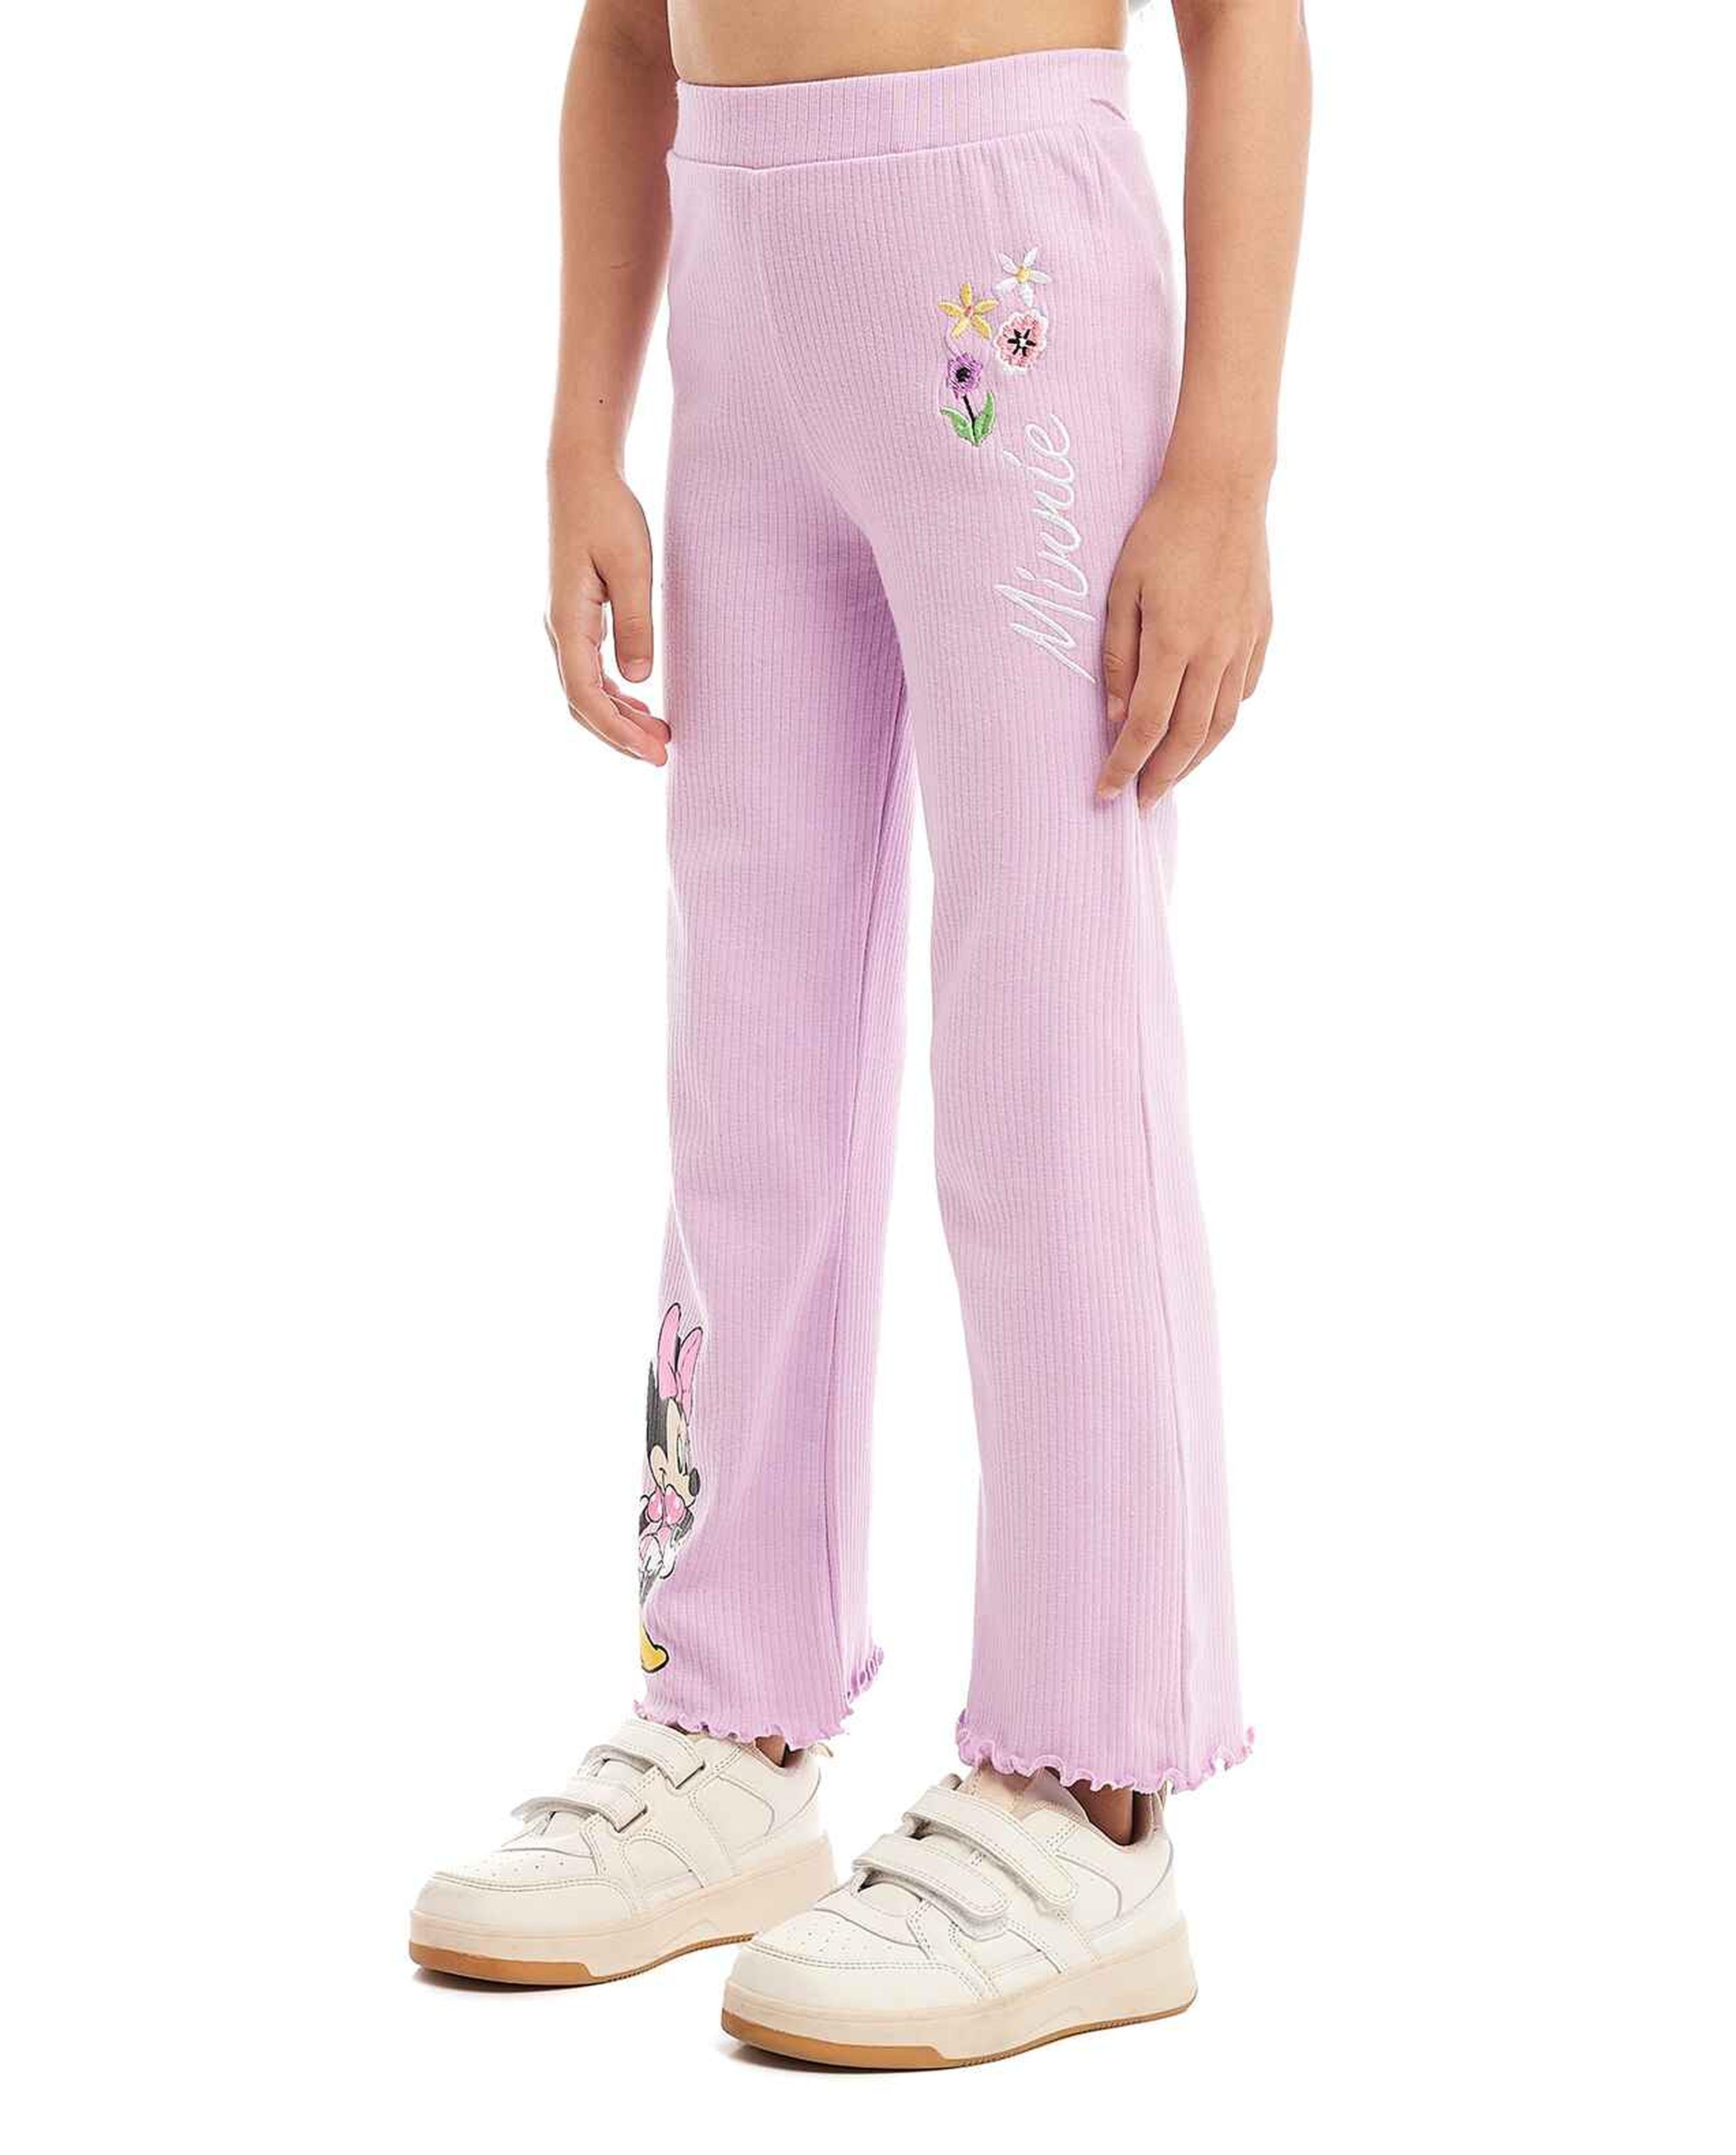 Mickey Mouse Print Pants with Elastic Waist